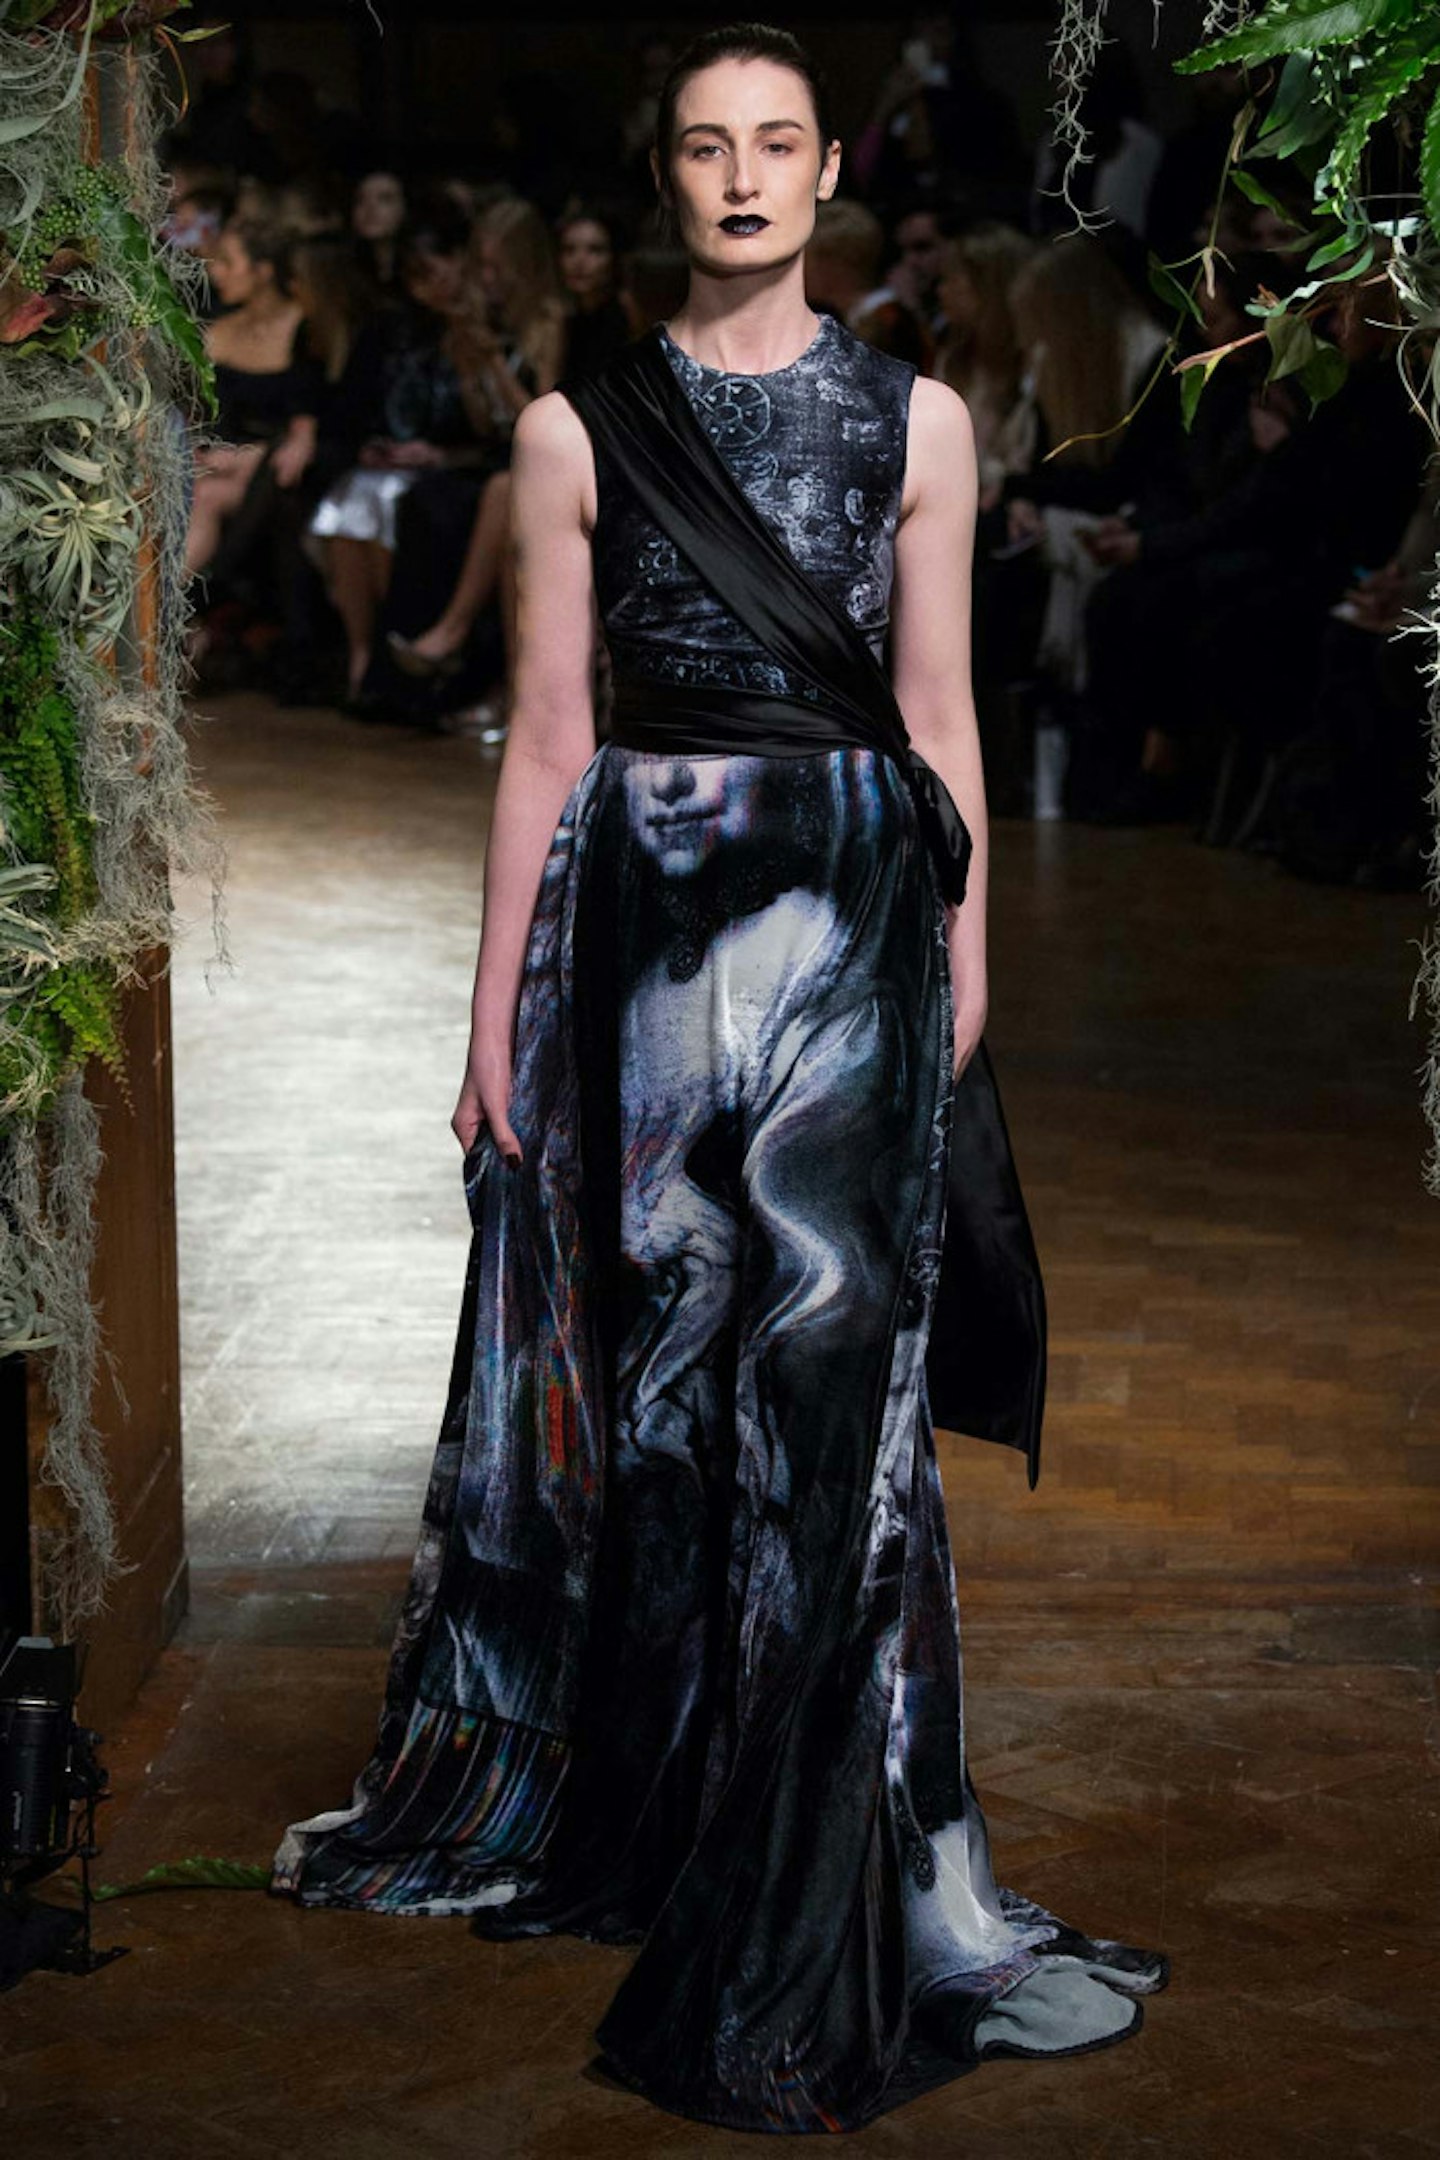 Drama, drama, drama could be the order of the day for Sienna if she selected this Giles gown.